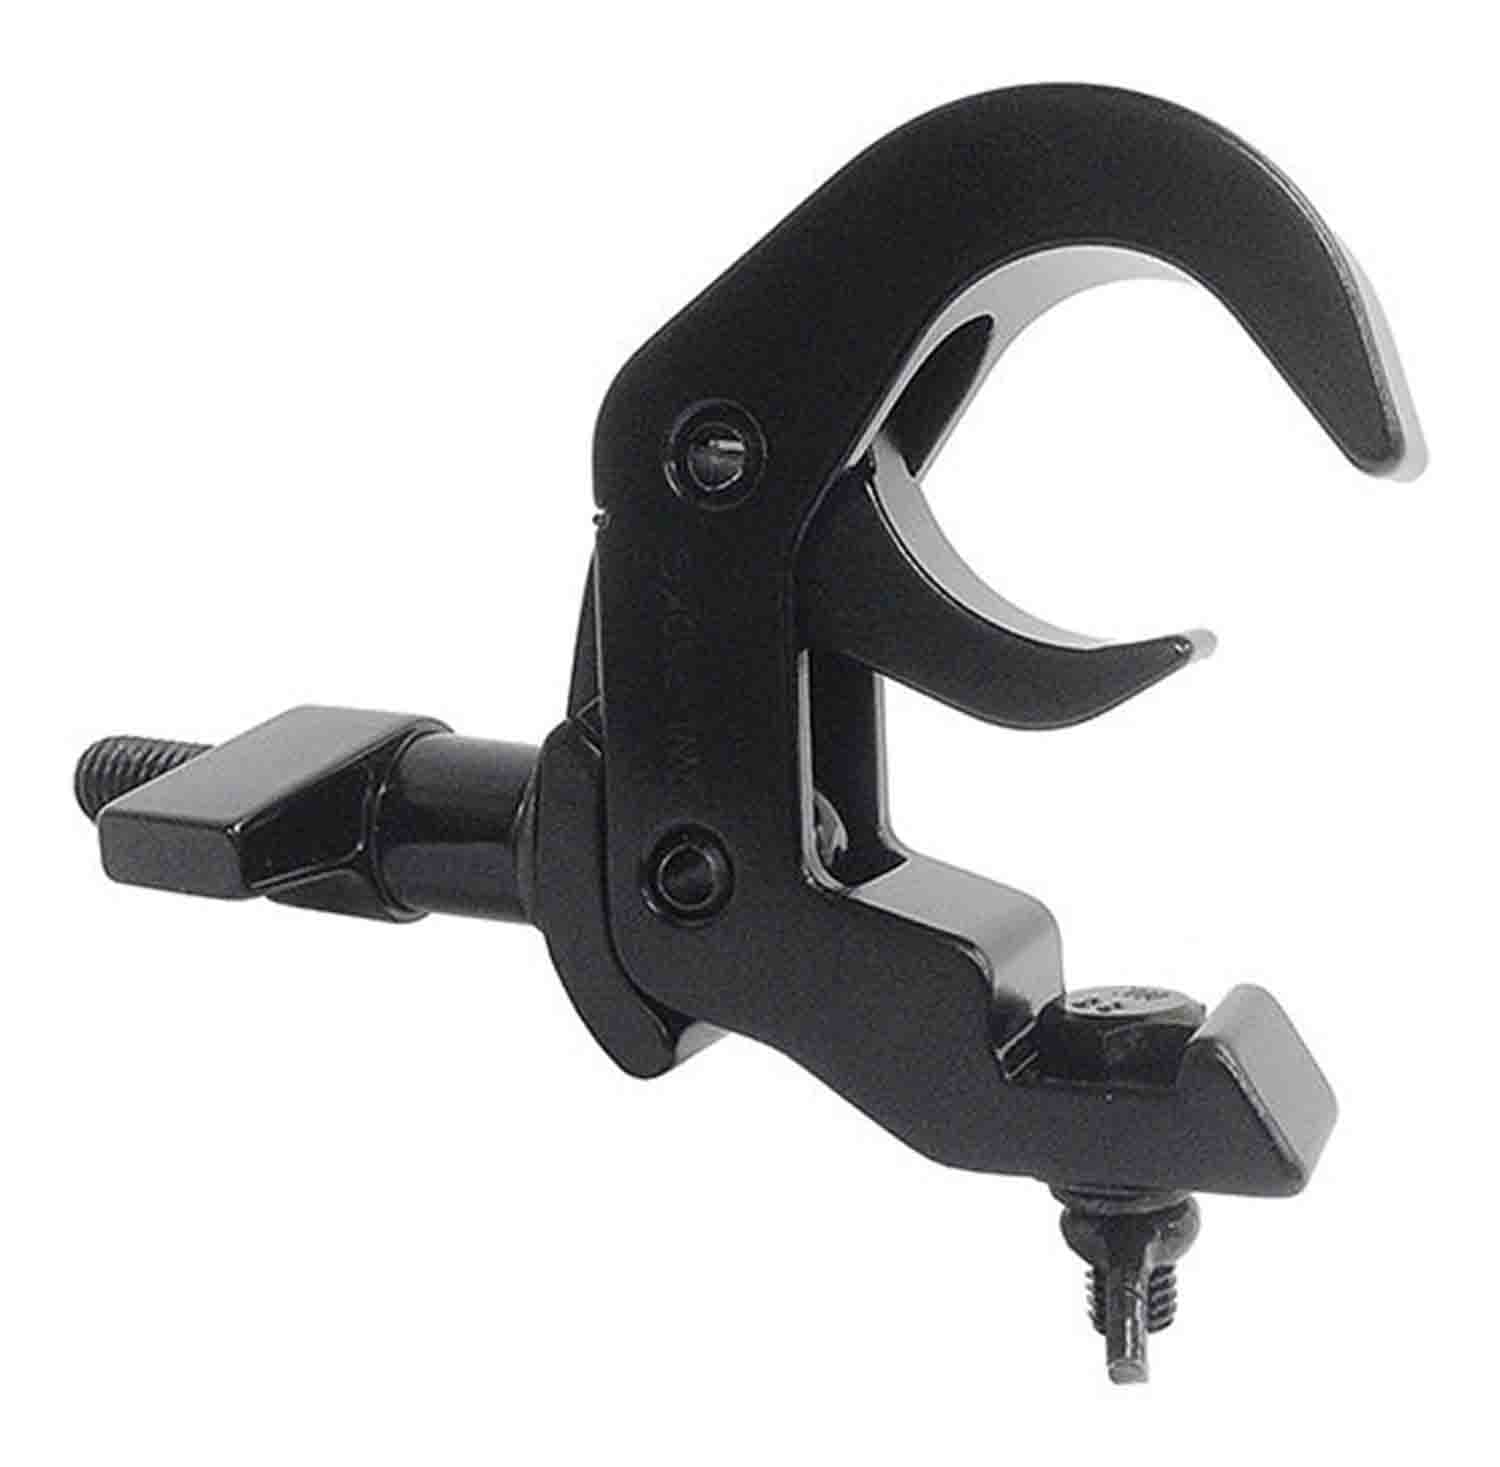 Global Truss QUICK RIG CLAMP BLK Heavy-Duty, Low-Profile Hook-Style - Black - Hollywood DJ